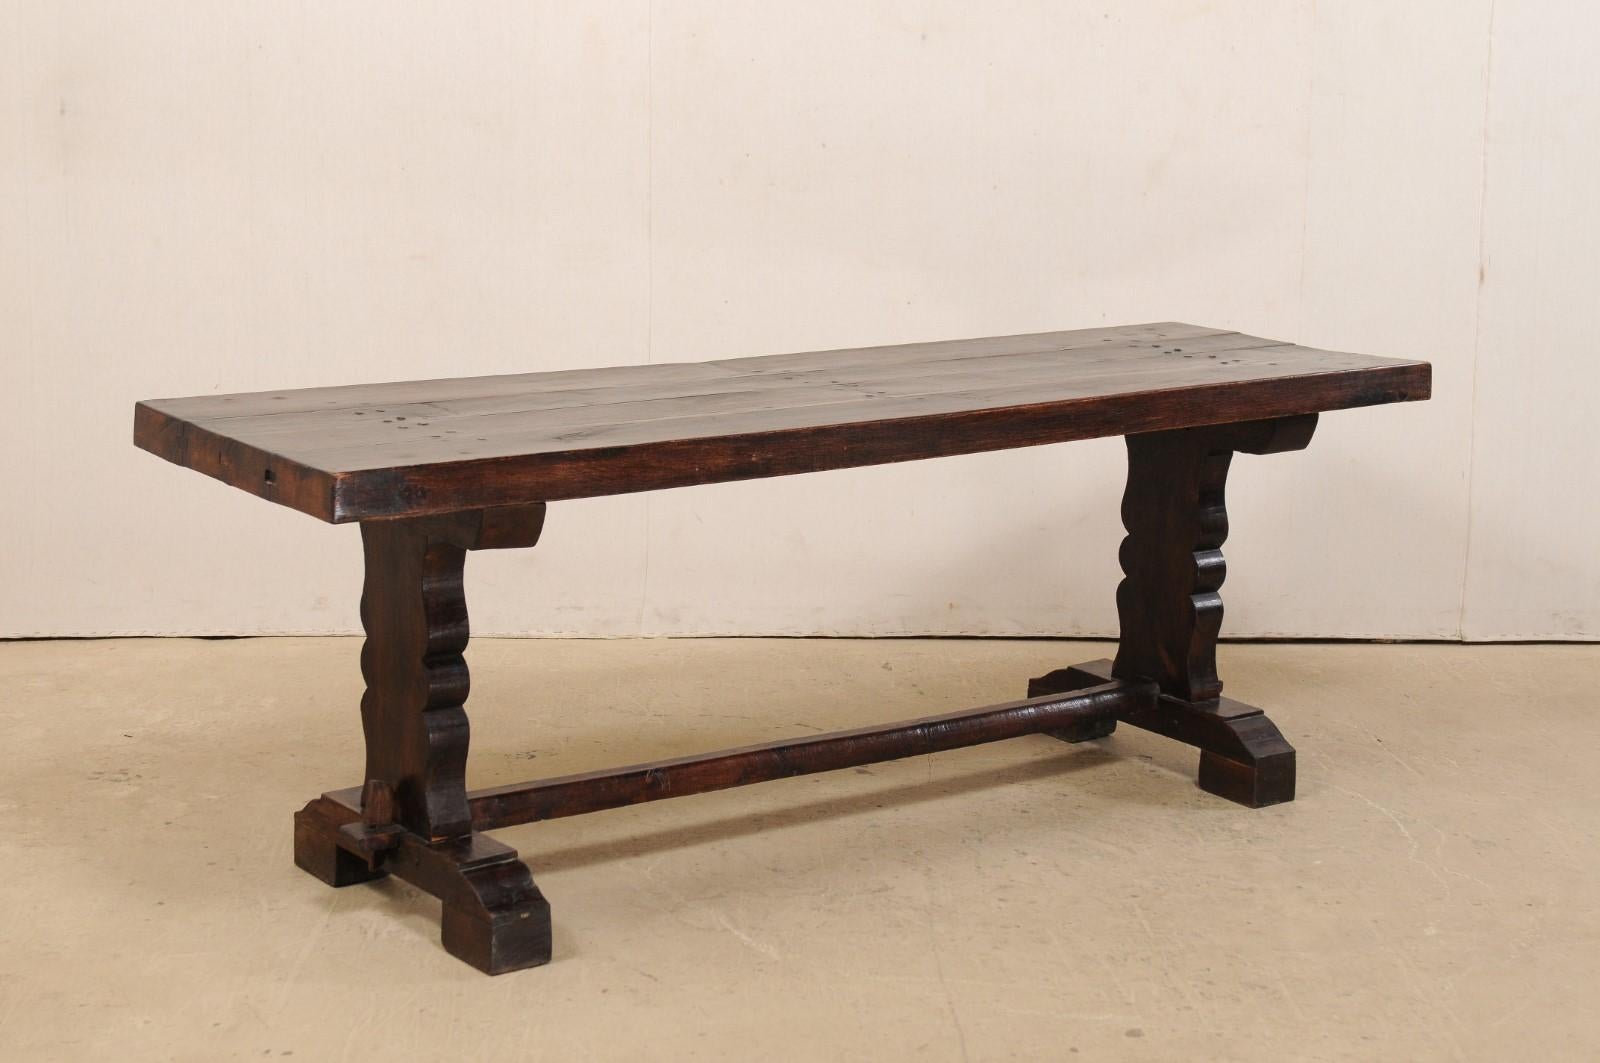 A French wooden console table from the 19th century. This elegant antique table from France has a rectangular-shaped top, just over 7 feet in length, which is supported by a pair of trestle legs (with curvy carvings down their sides), and braced